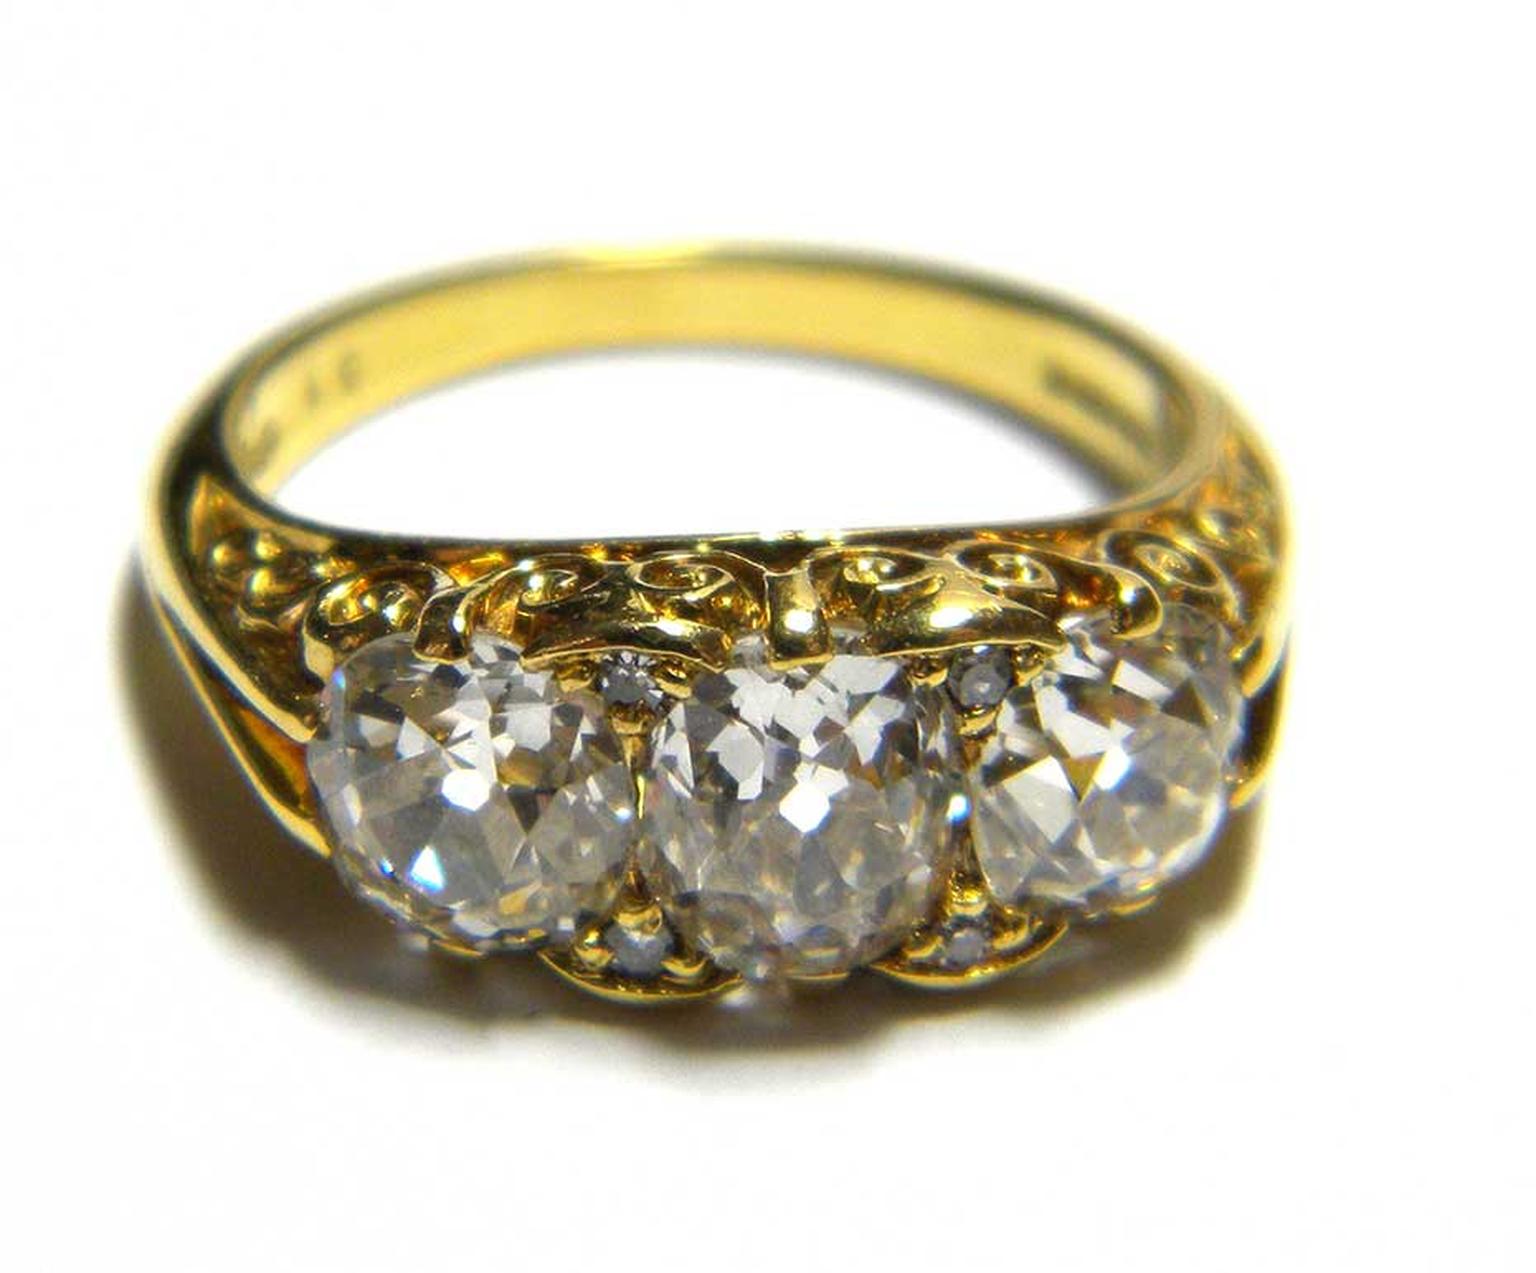 Vintage engagement rings: what you need to know before buying vintage jewellery